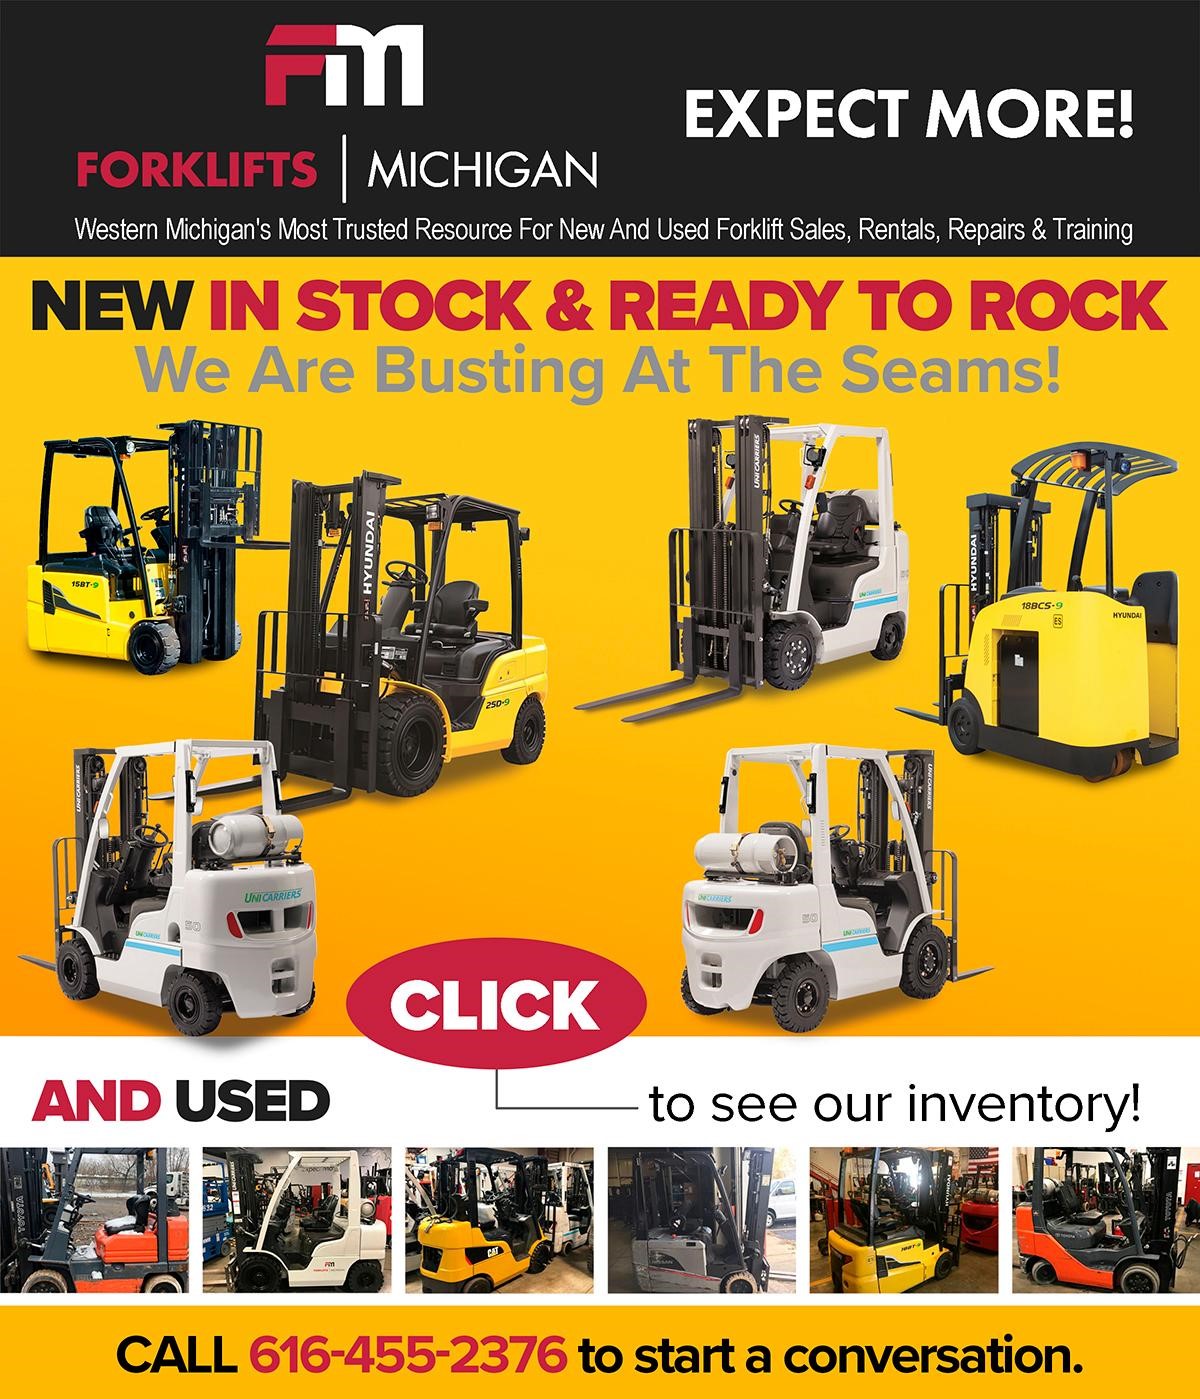 FORKLIFTS | MICHIGAN EXPECT MORE!  
Western Michigan's Most Trusted Resource For New And Used Forklift Sales, Rentals, Repairs & Training NEW IN STOCK & READY TO ROCK We Are Busting At The Seams! 
CLICK to see our New and Used Inventory CALL 616-455-2376 to start a conversation. 